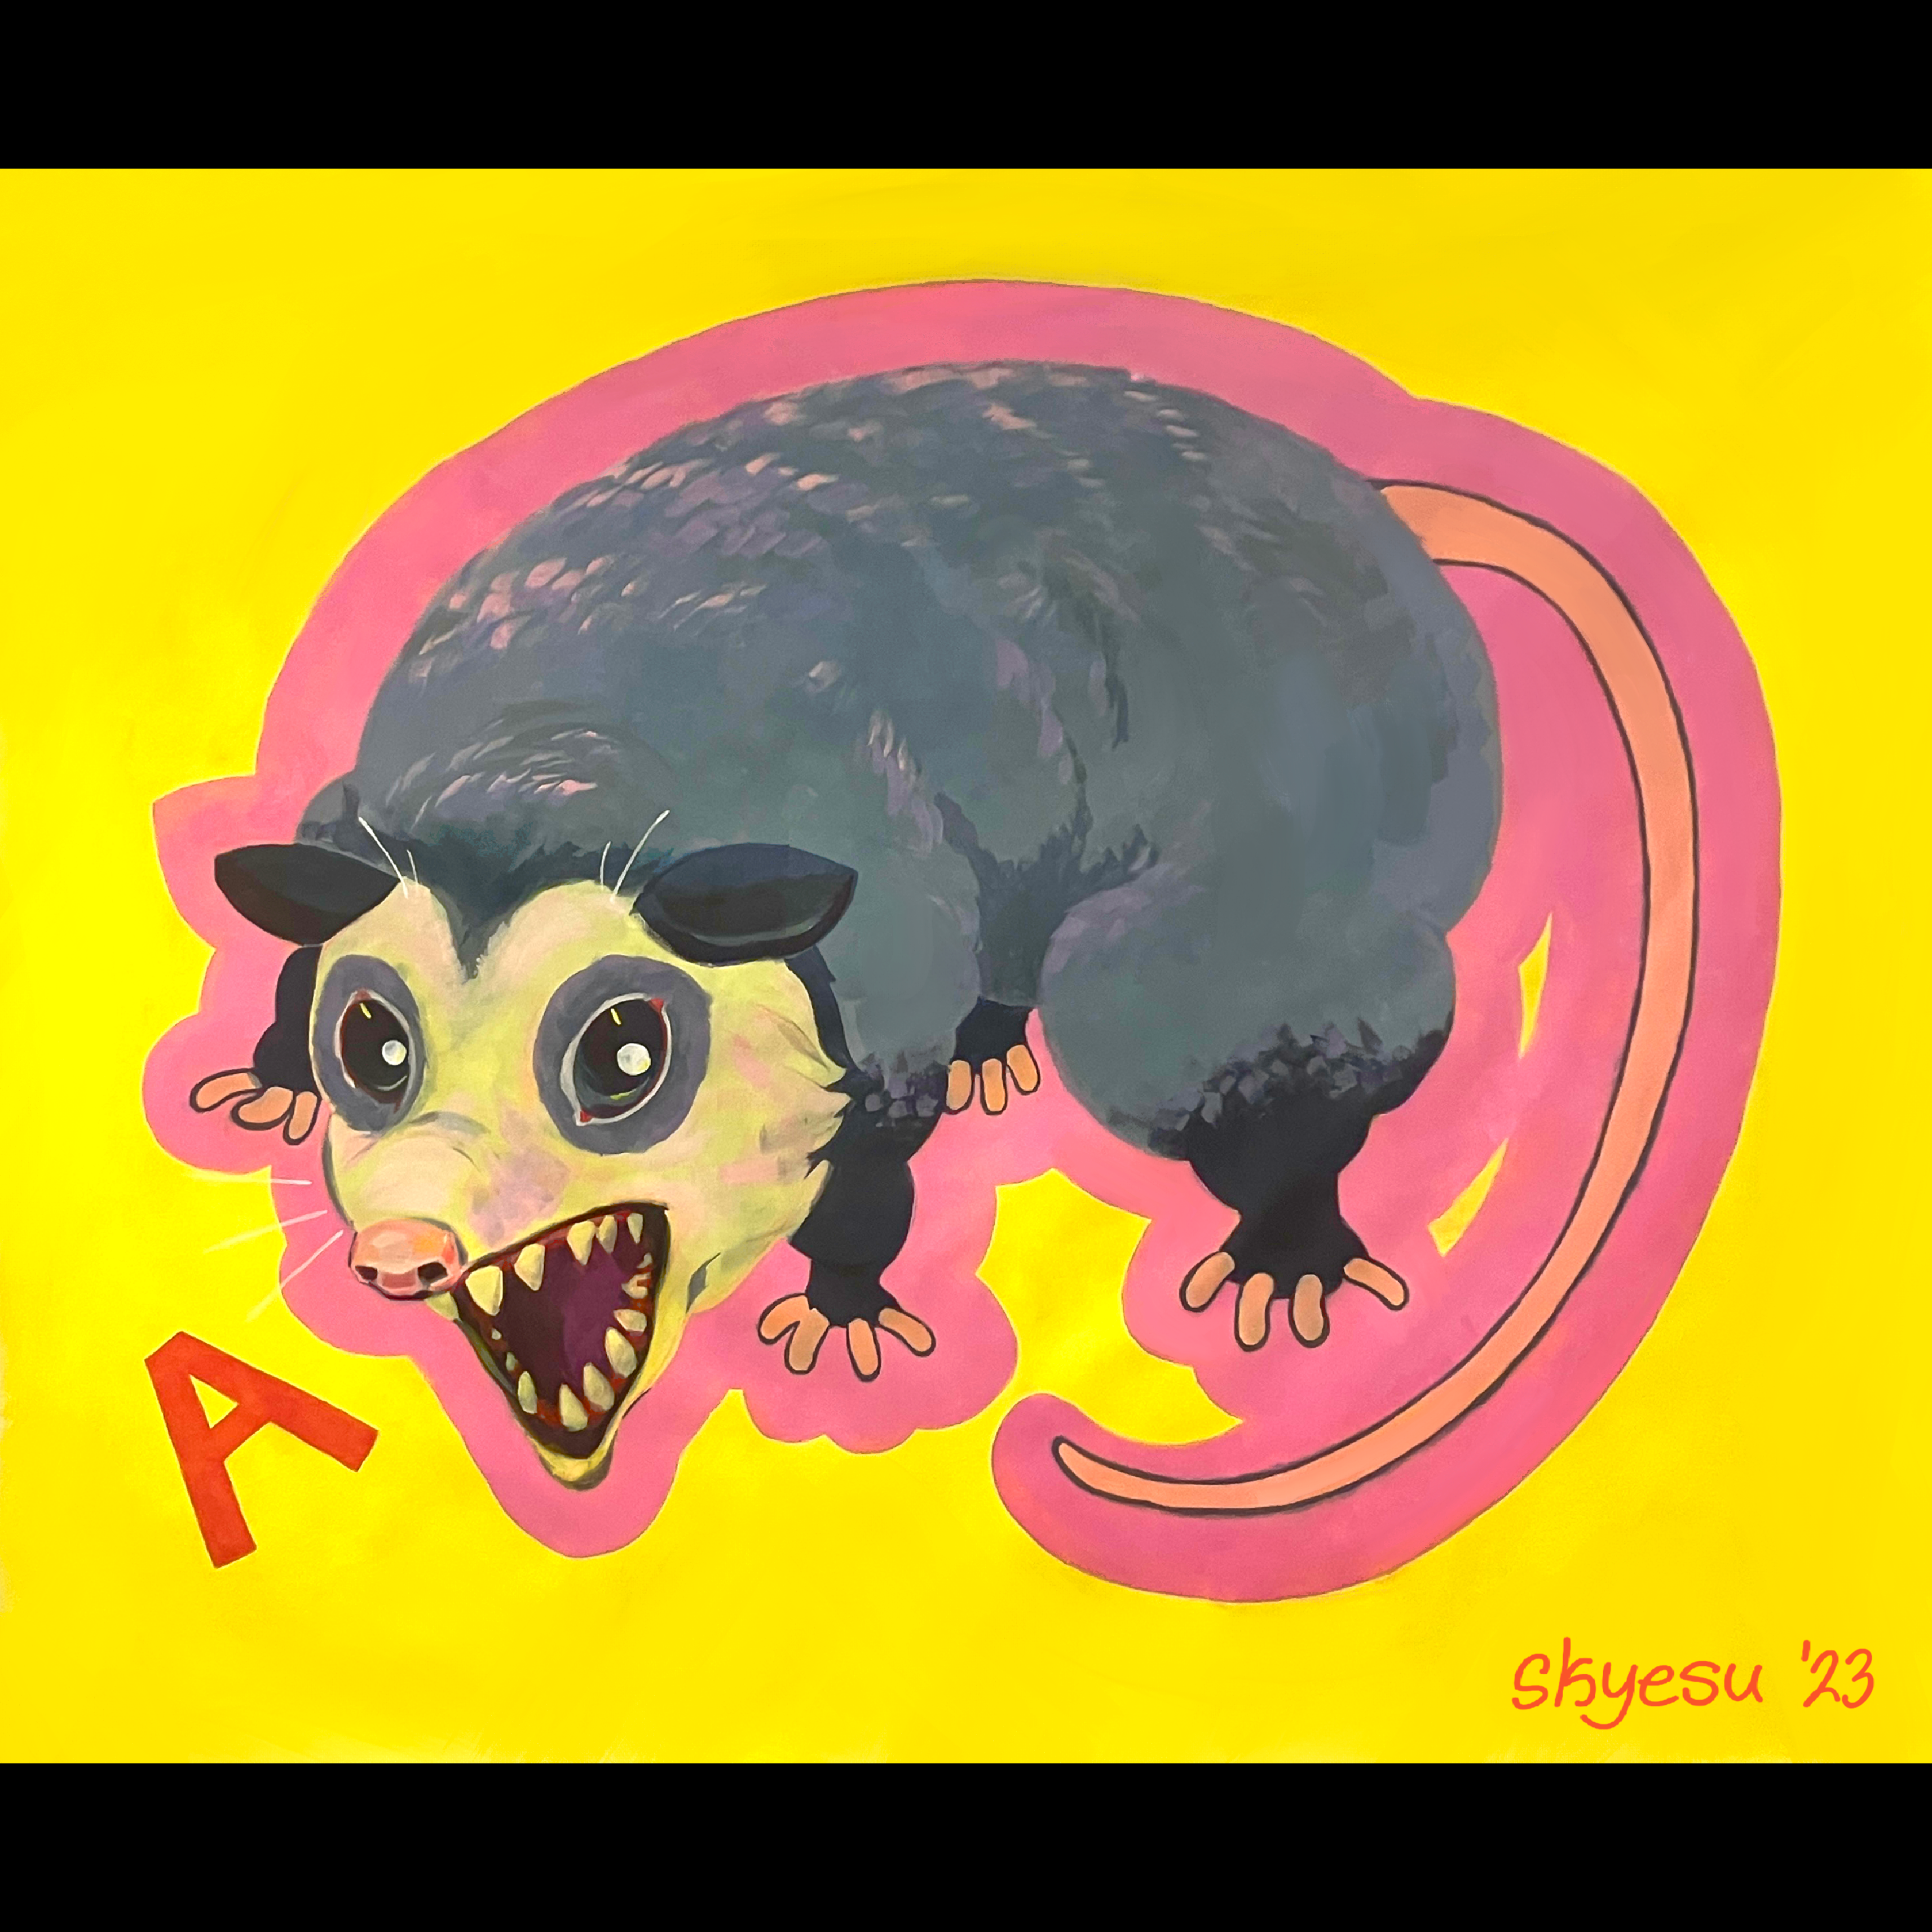 acrylic painting of a yelling possum on a bright yellow background, surrounded by a pink border